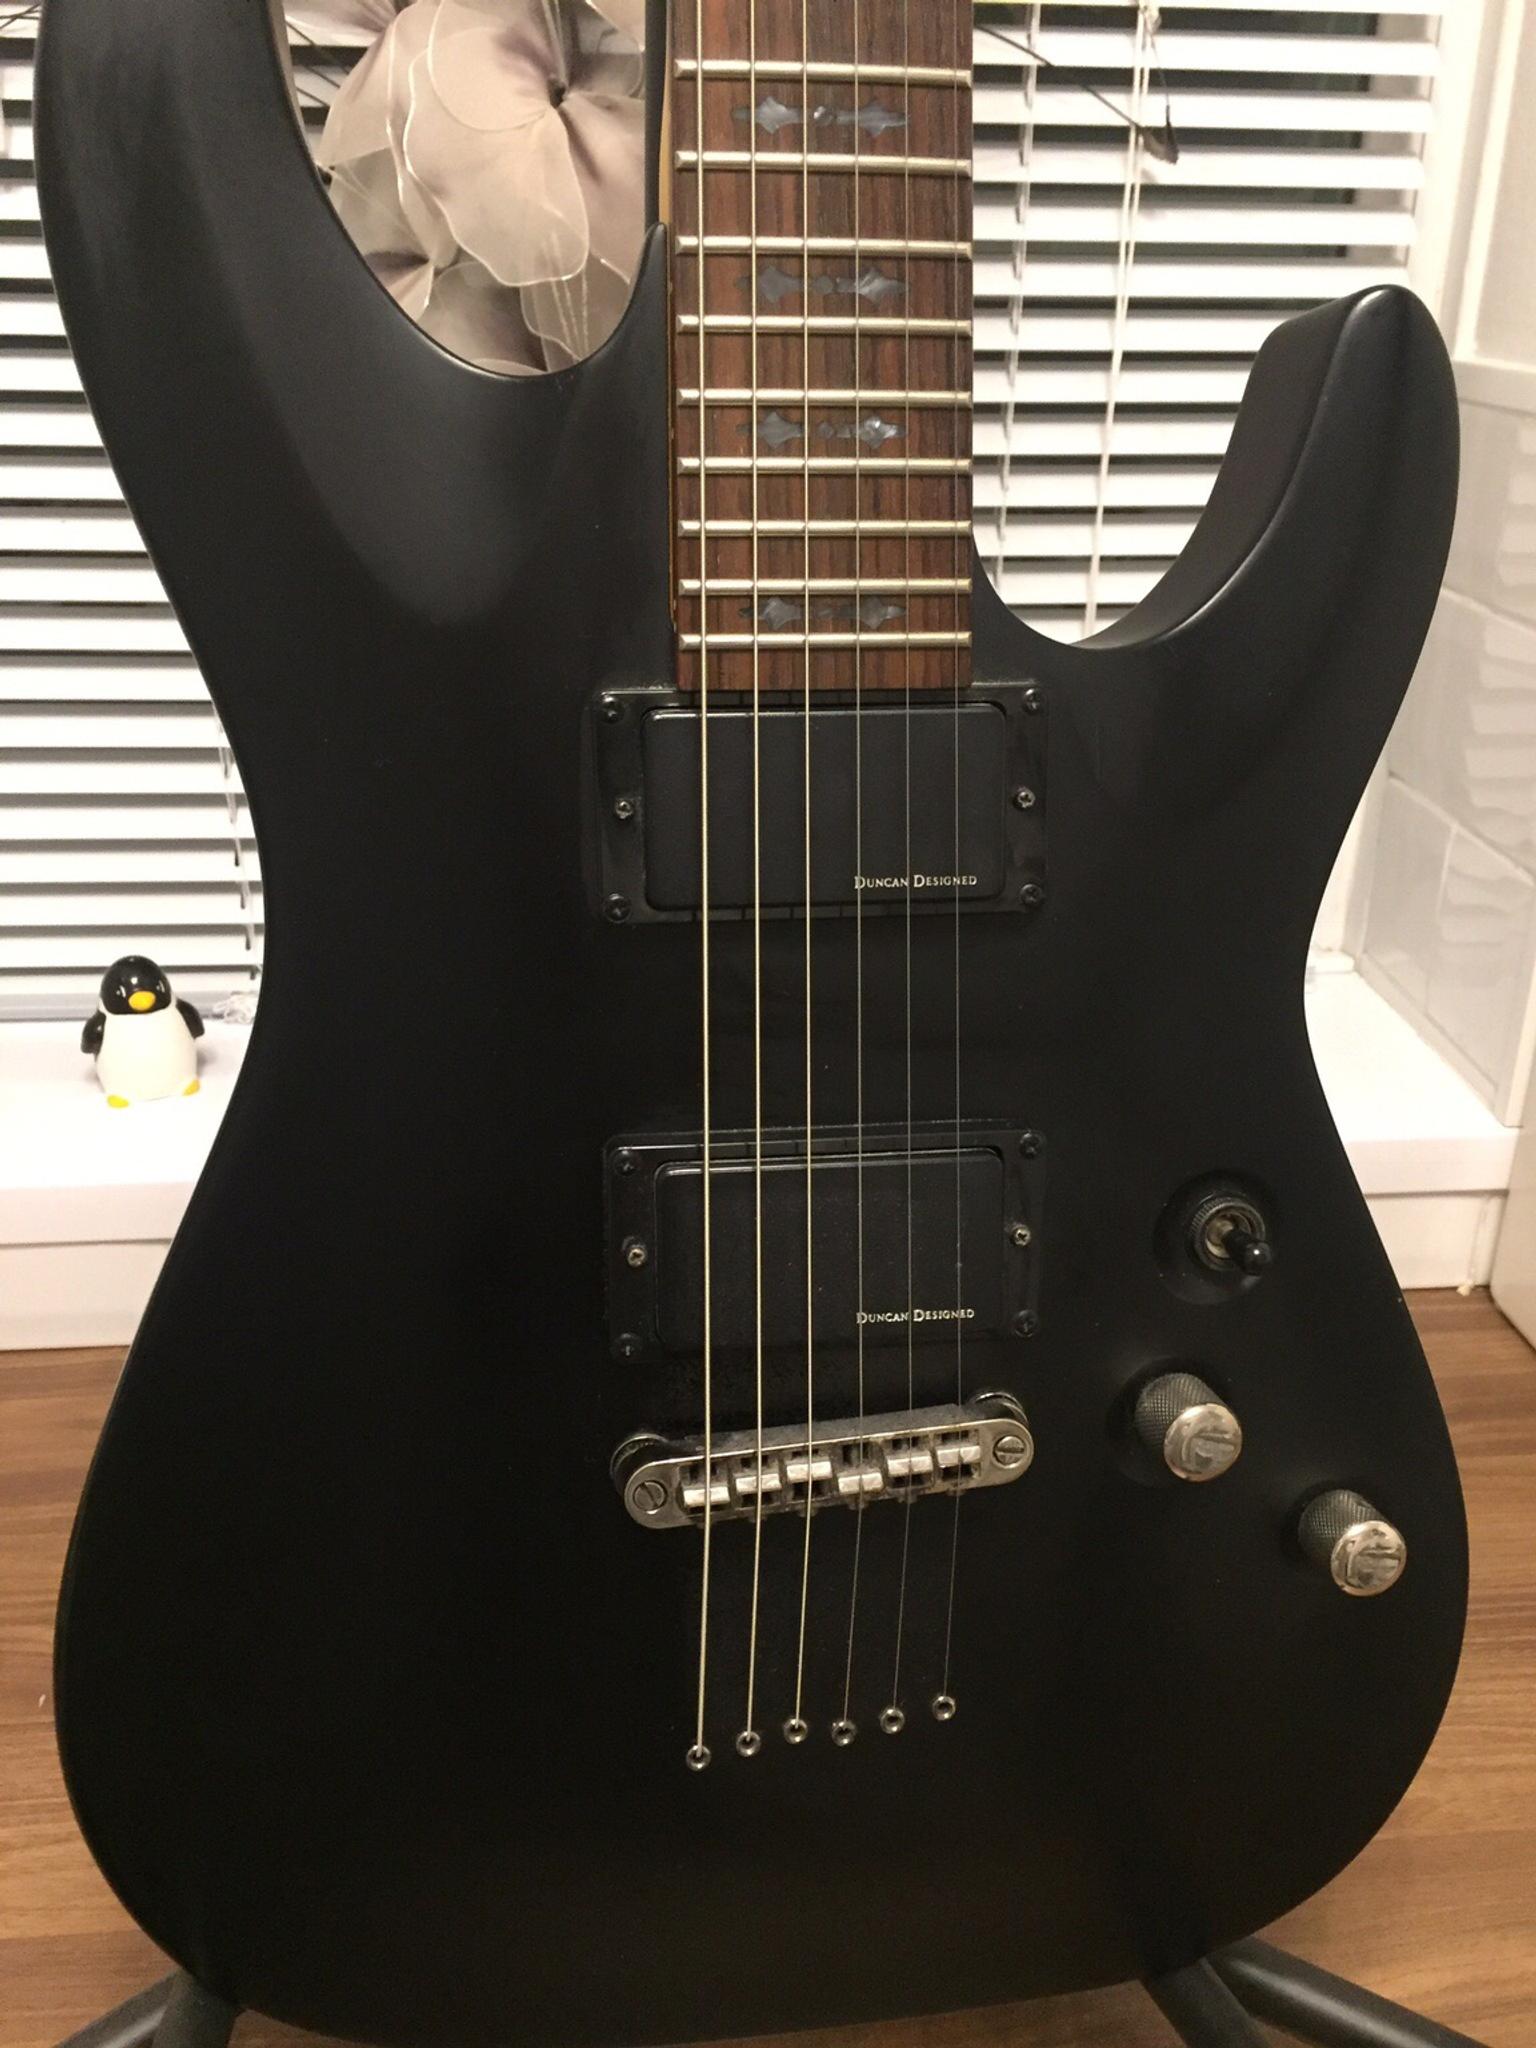 Schecter diamond series Demon 6 Guitar in CV6 Bedworth for £145.00 for sale  | Shpock